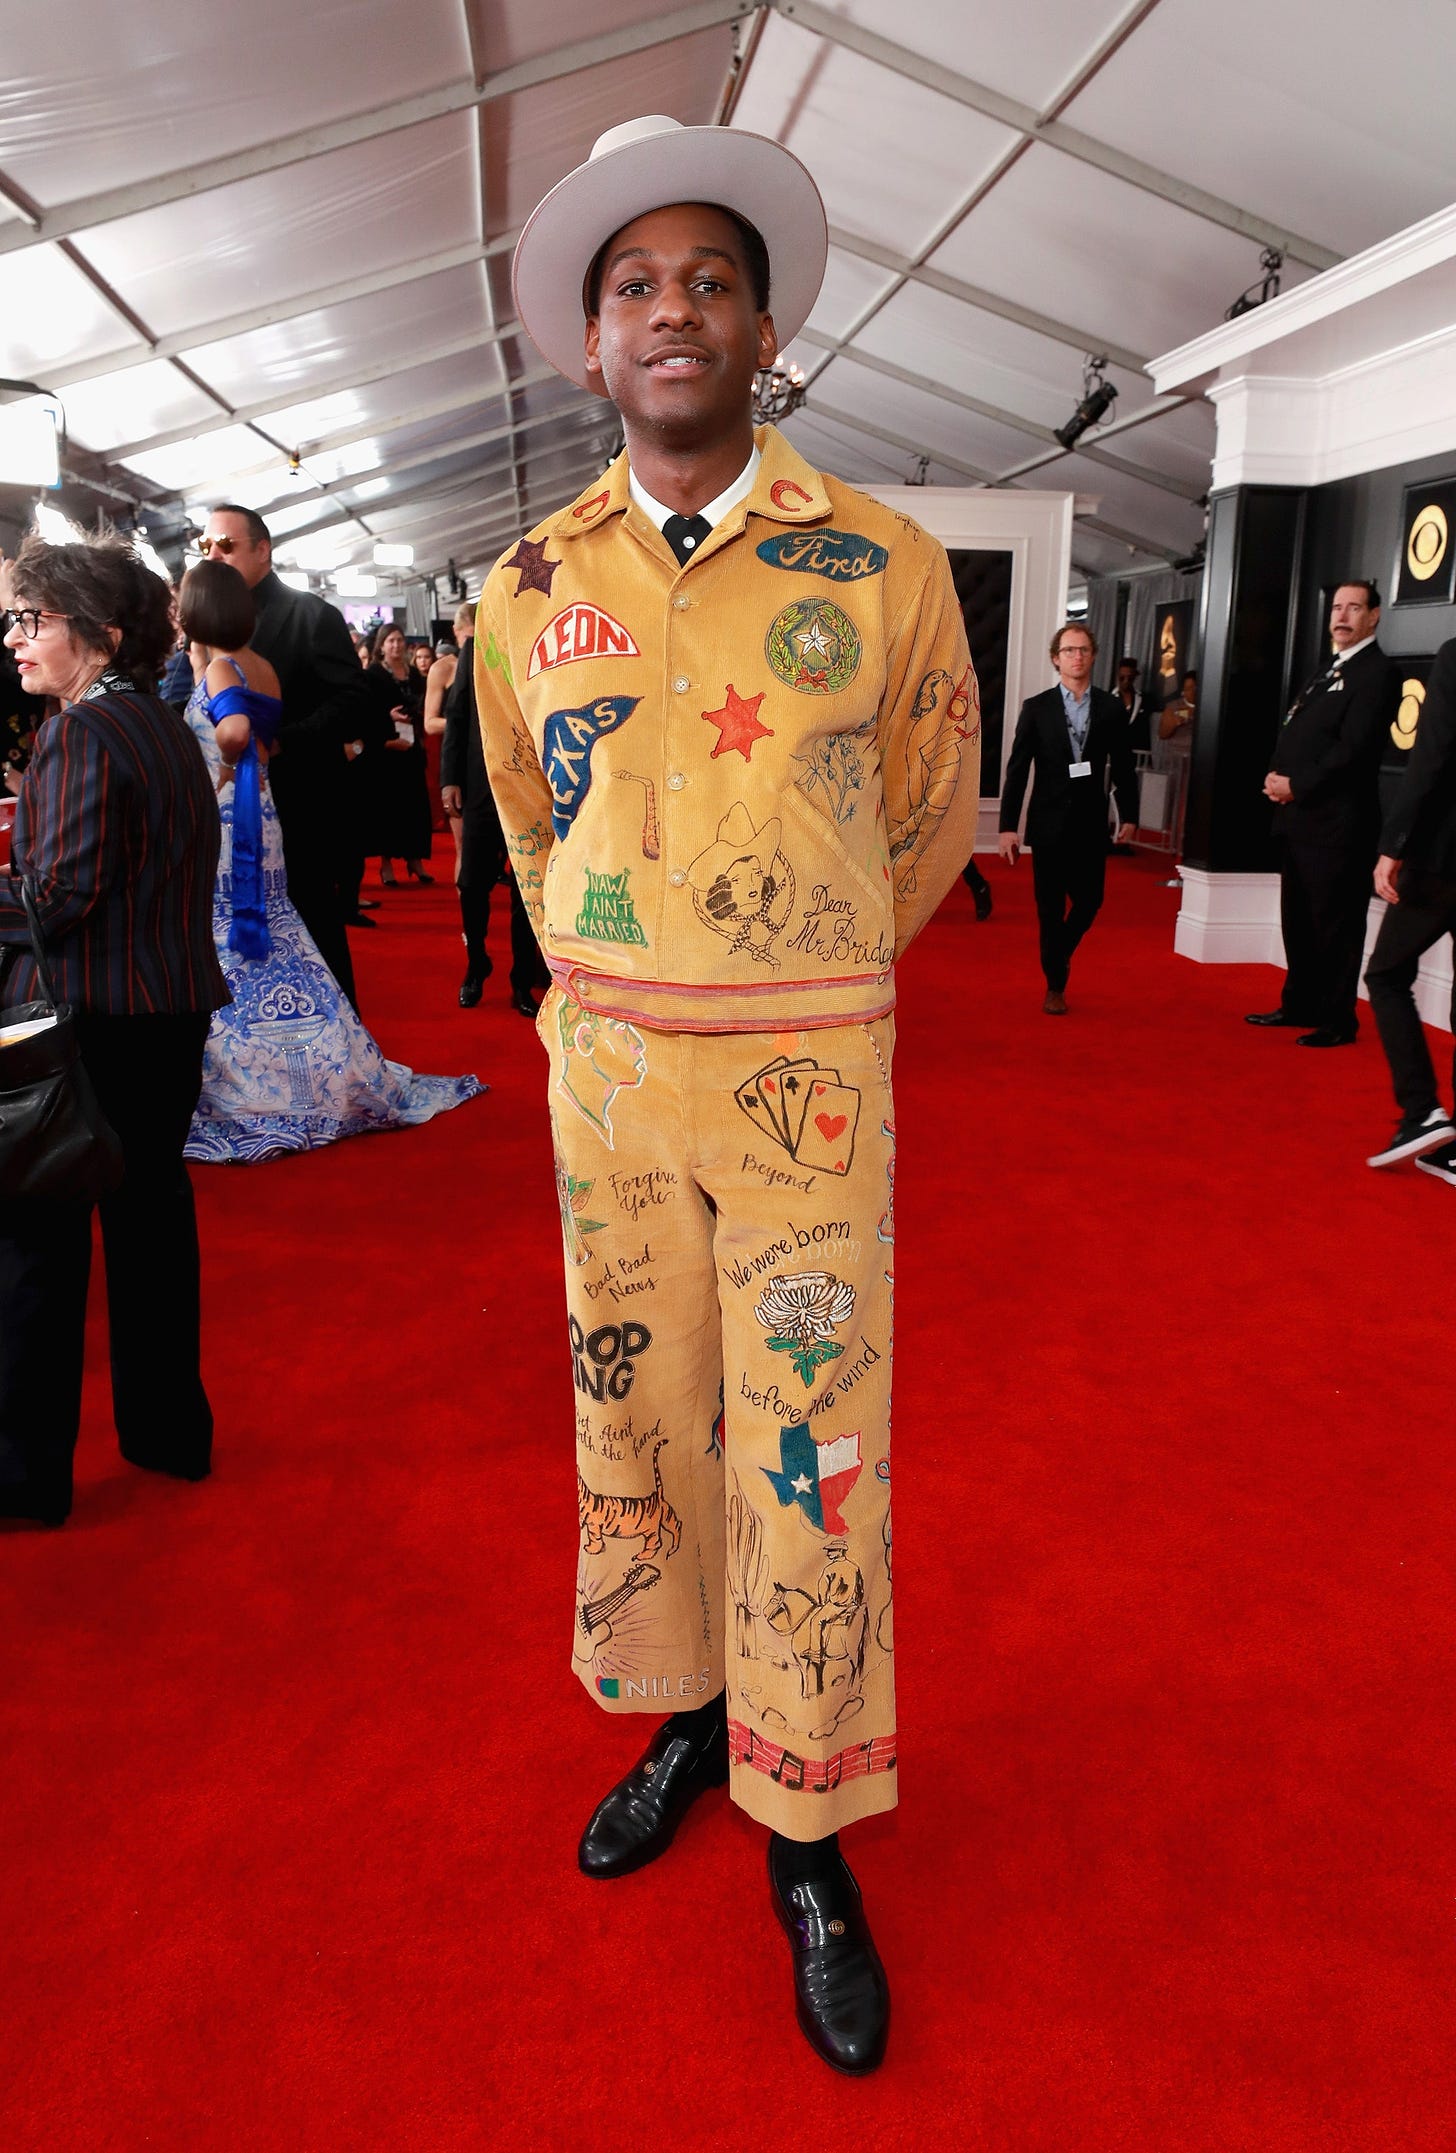 See the Custom Bode Suit that Leon Bridges Wore to the Grammys | Vogue